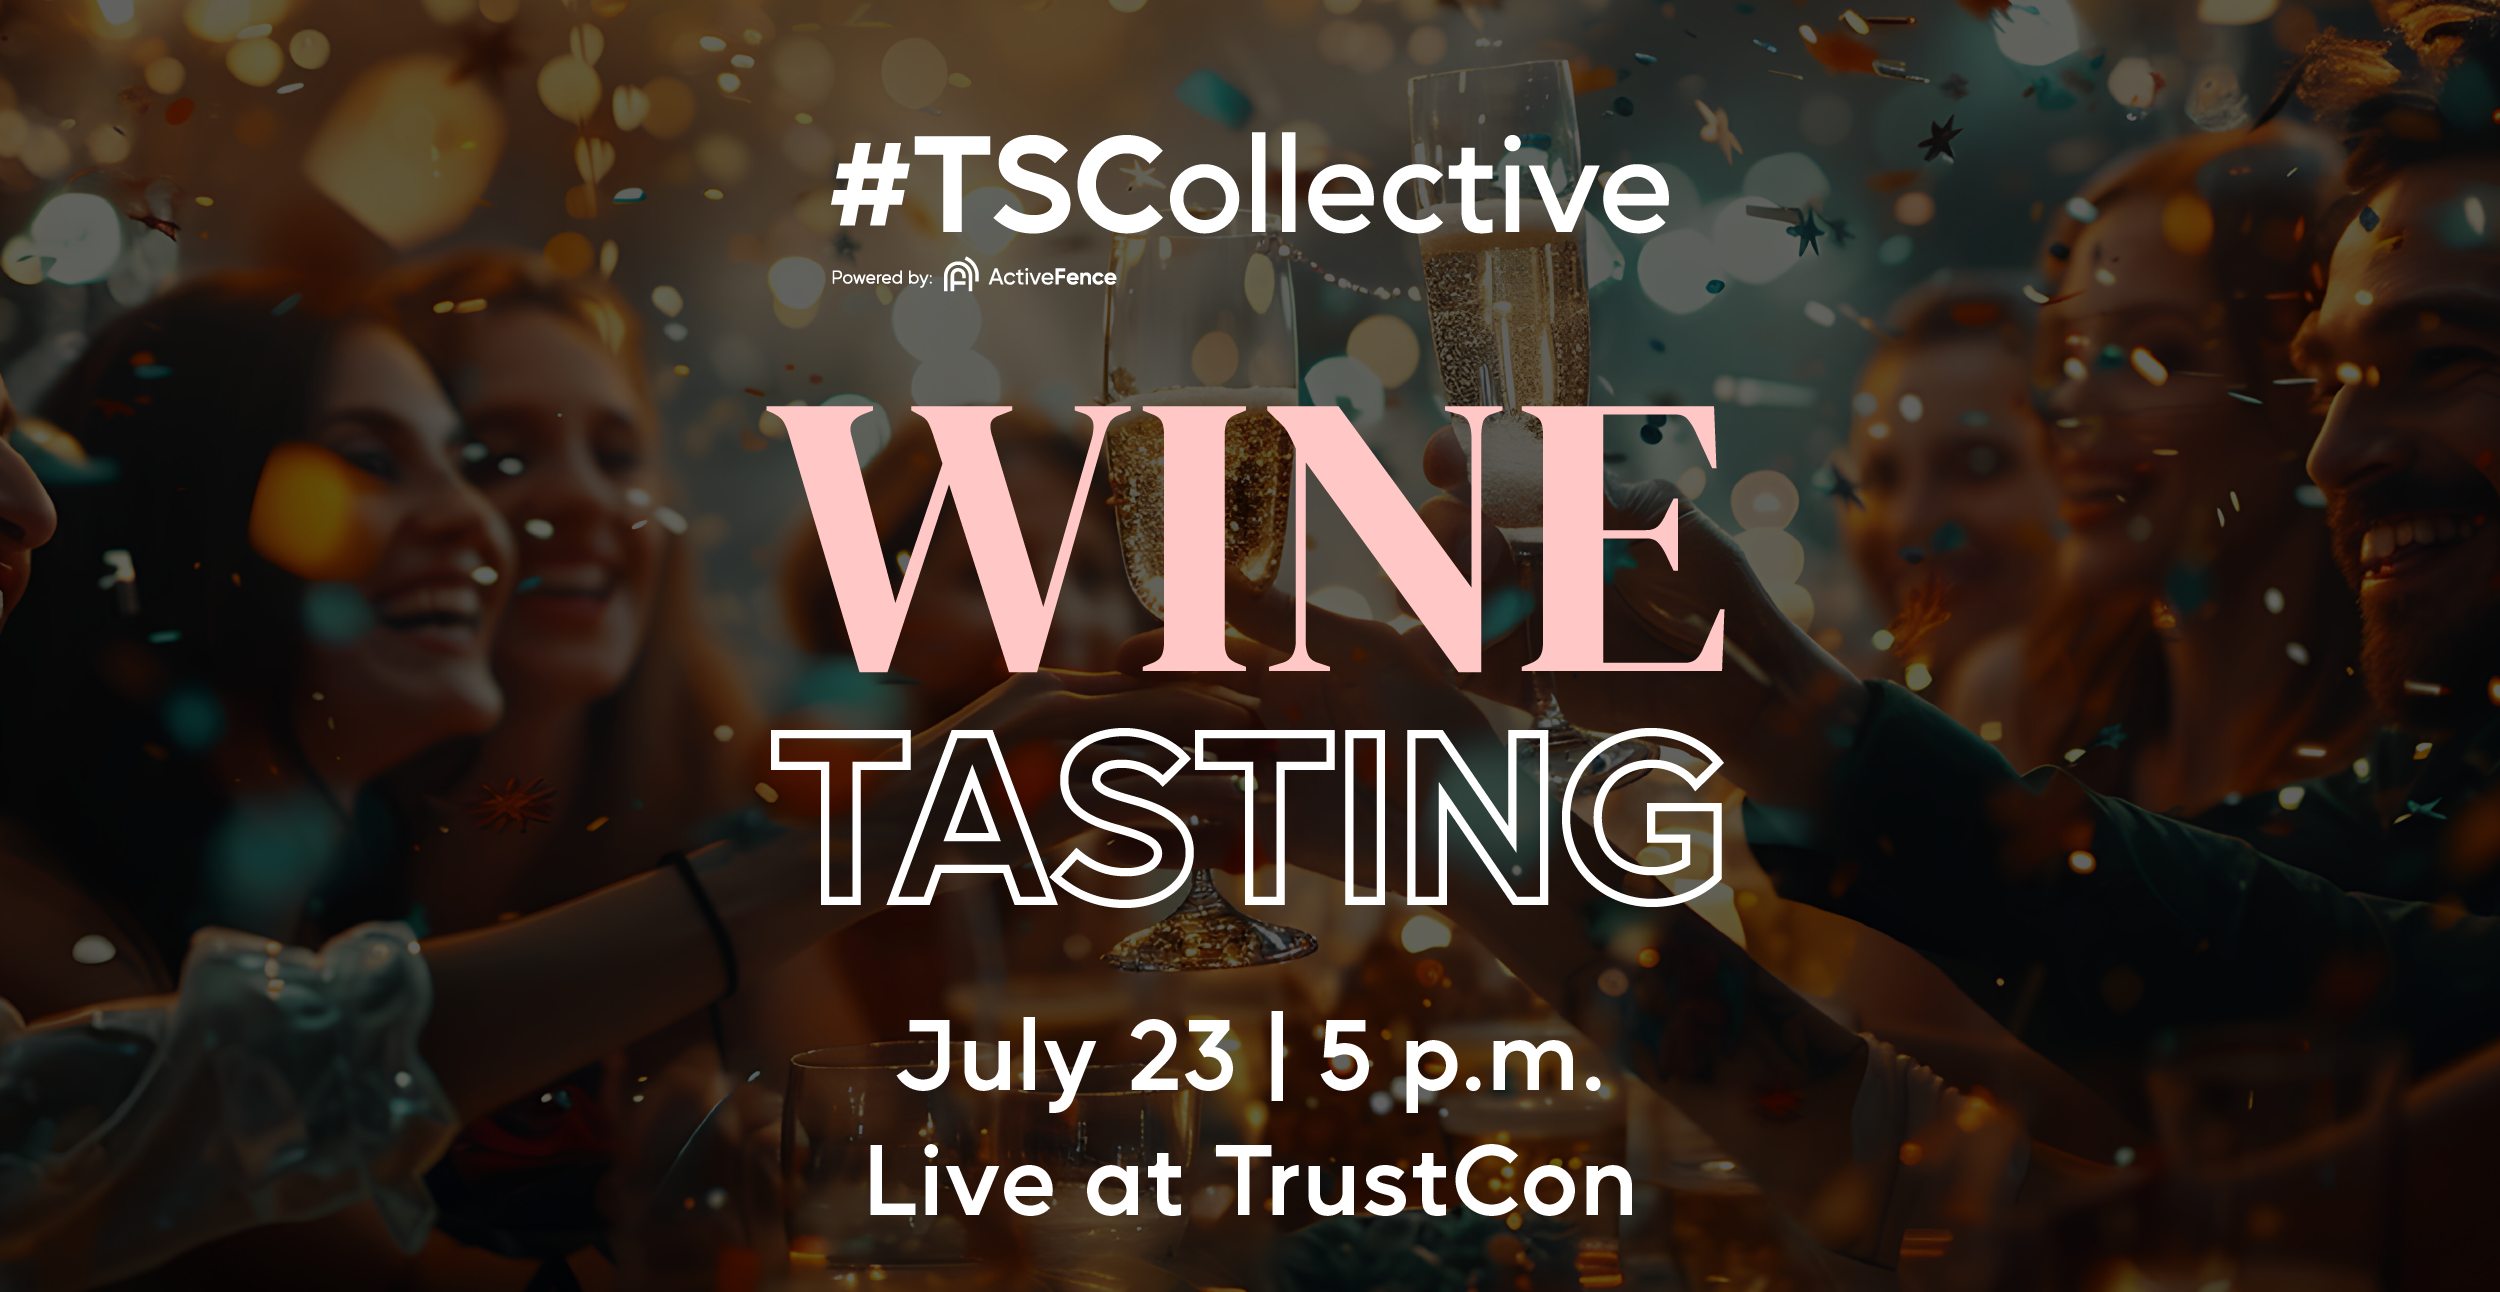 Image promoting the #TSCollective Wine Tasting event powered by ActiveFence, with attendees toasting and celebrating. Event details: July 23, 5 p.m., Live at TrustCon